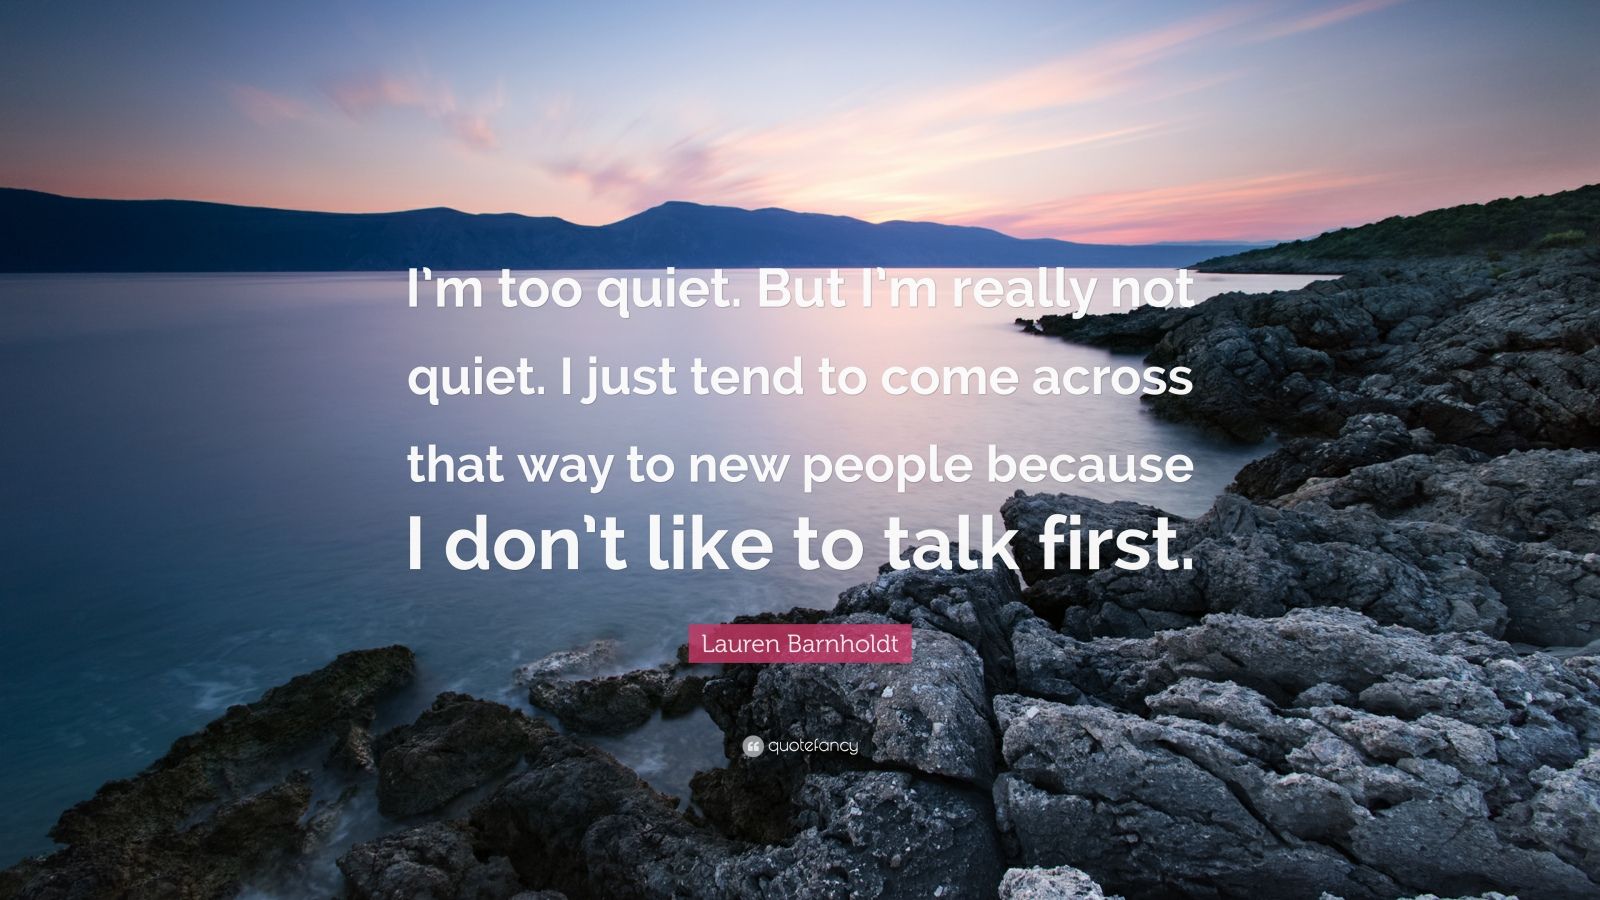 Lauren Barnholdt Quote I M Too Quiet But I M Really Not Quiet I Just Tend To Come Across That Way To New People Because I Don T Like To Talk